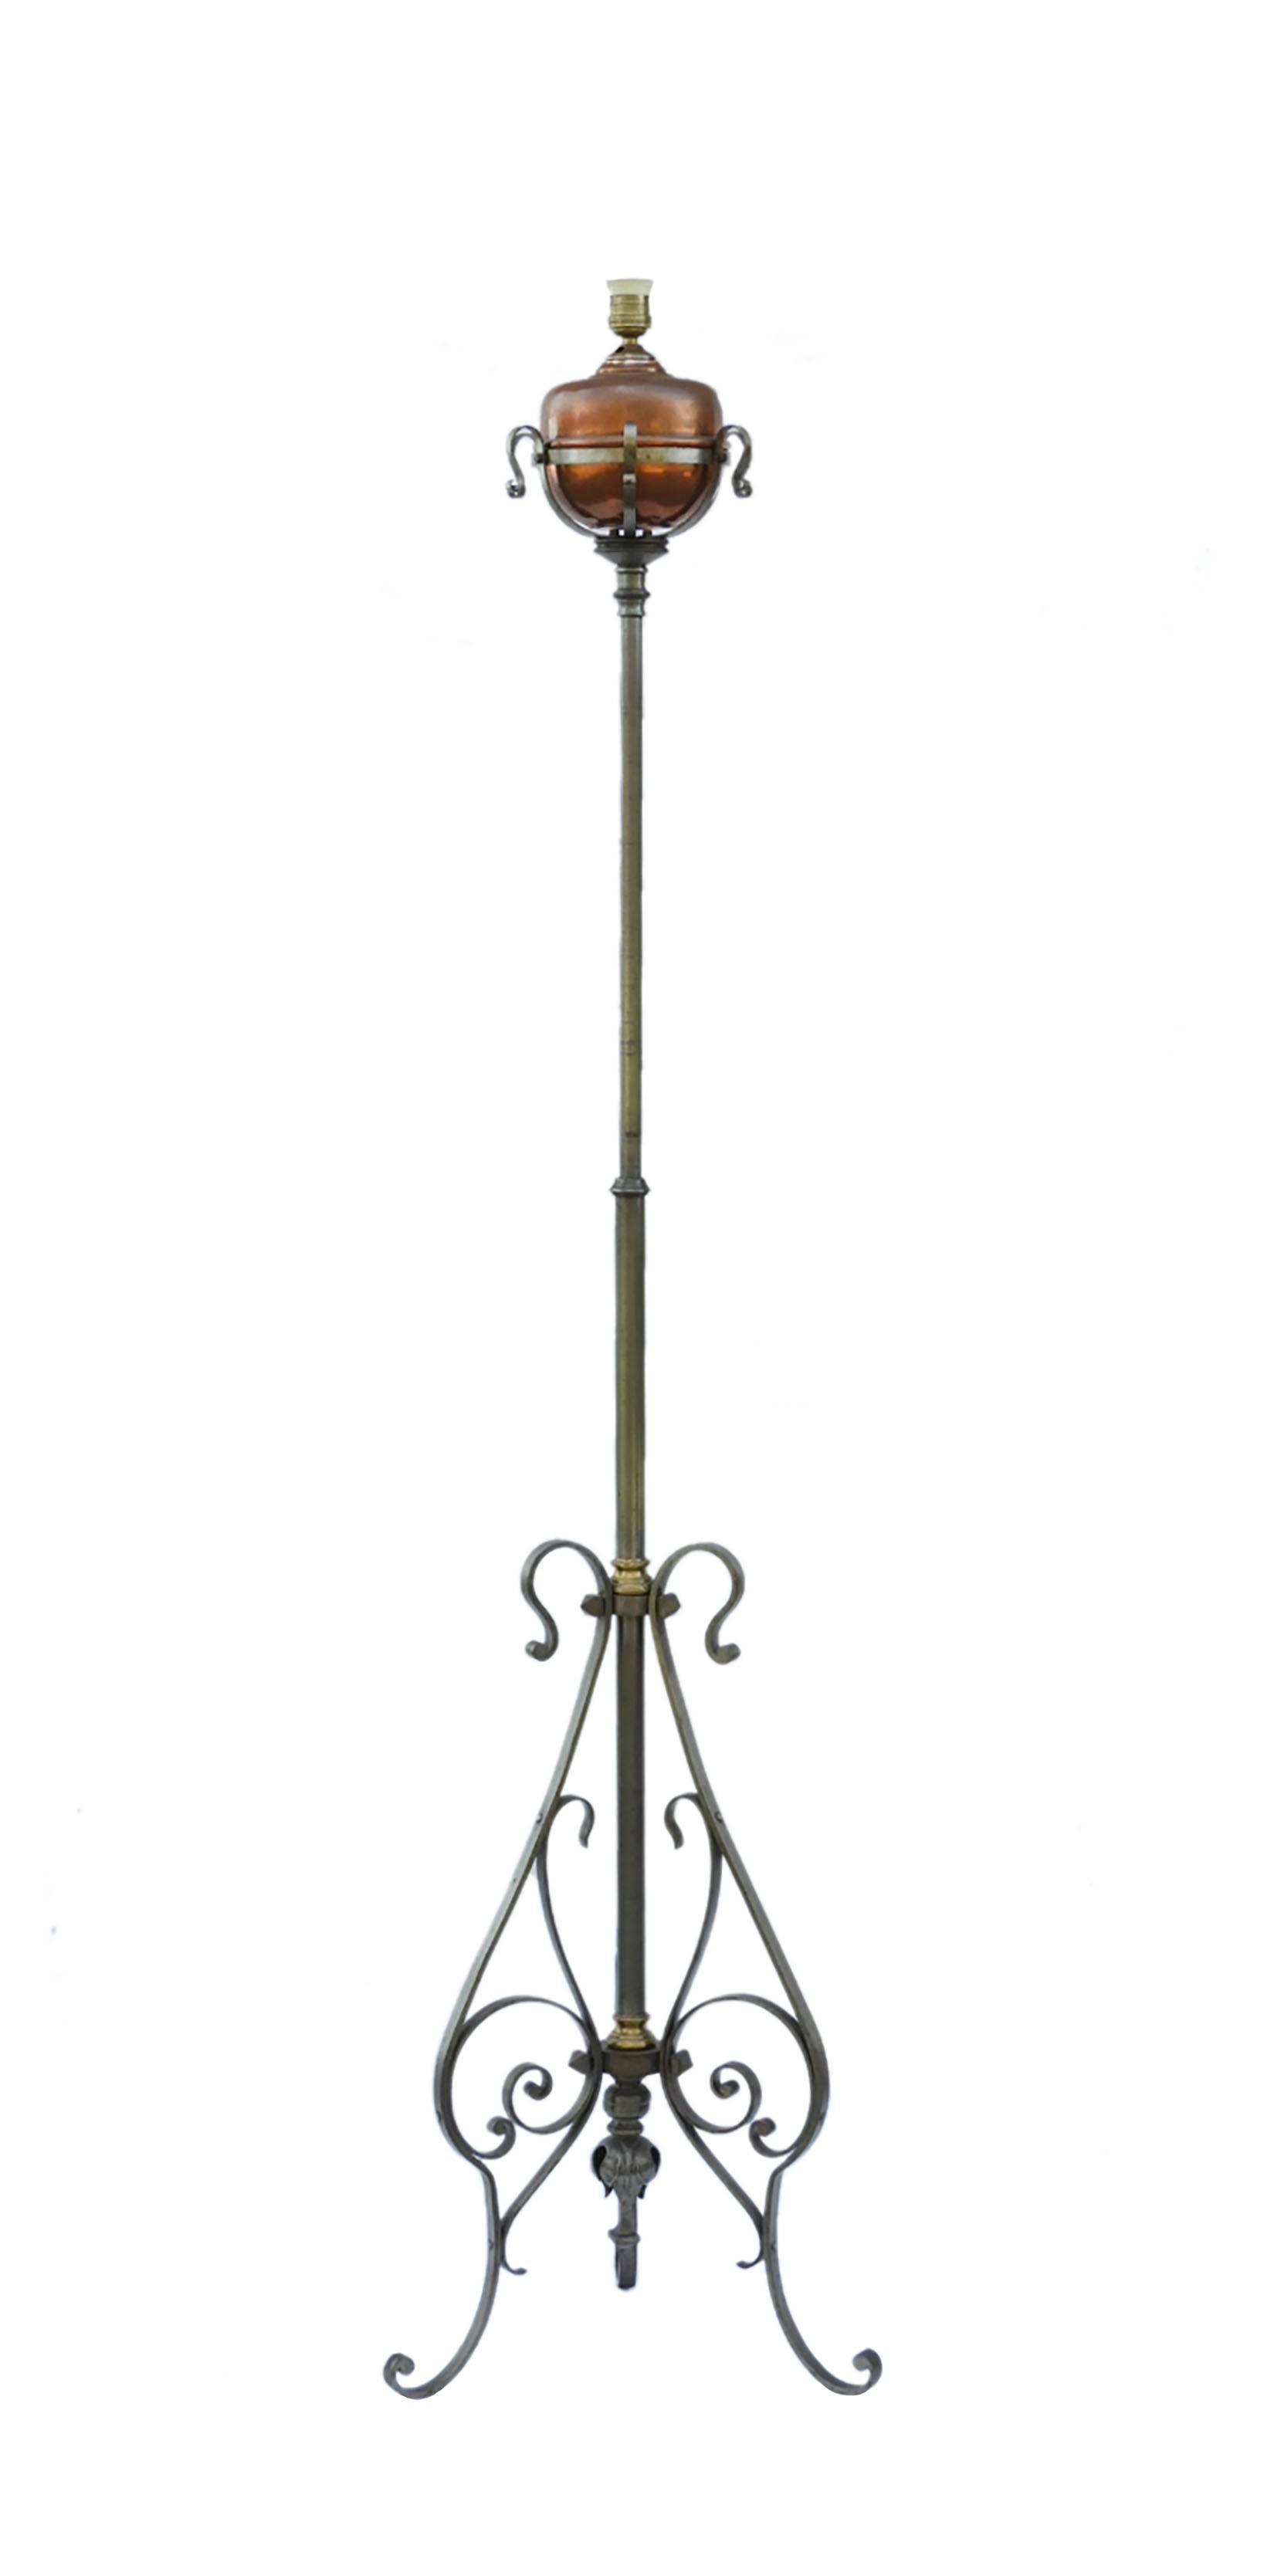 French Floor Lamp Telescopic Arts and Crafts Wrought Iron Standard Light Adjustable